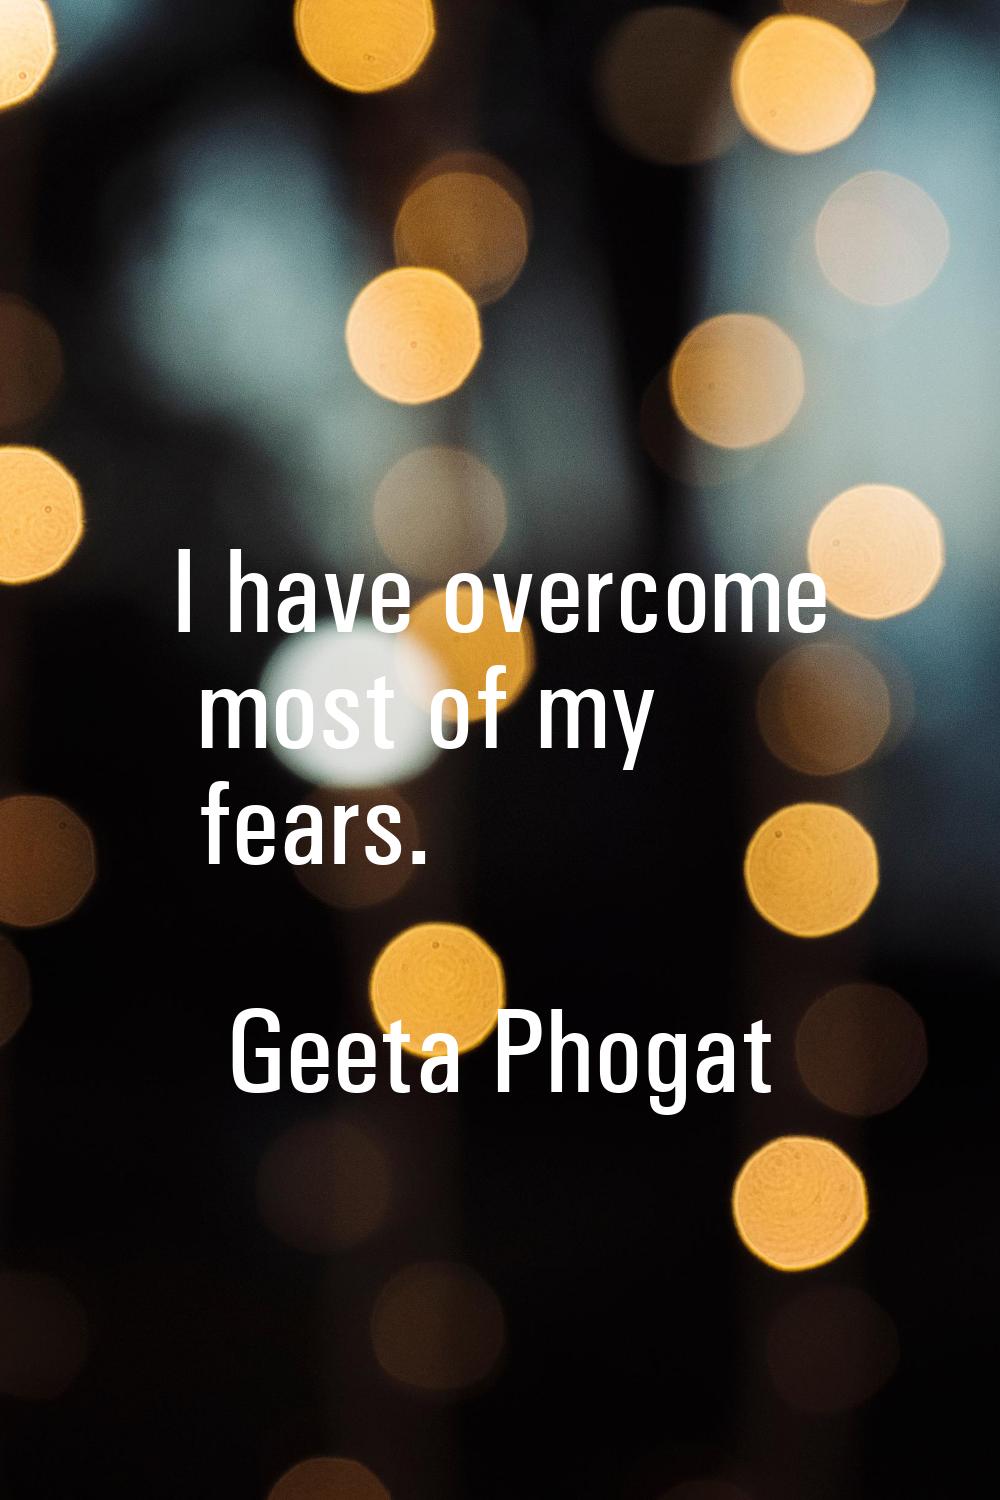 I have overcome most of my fears.